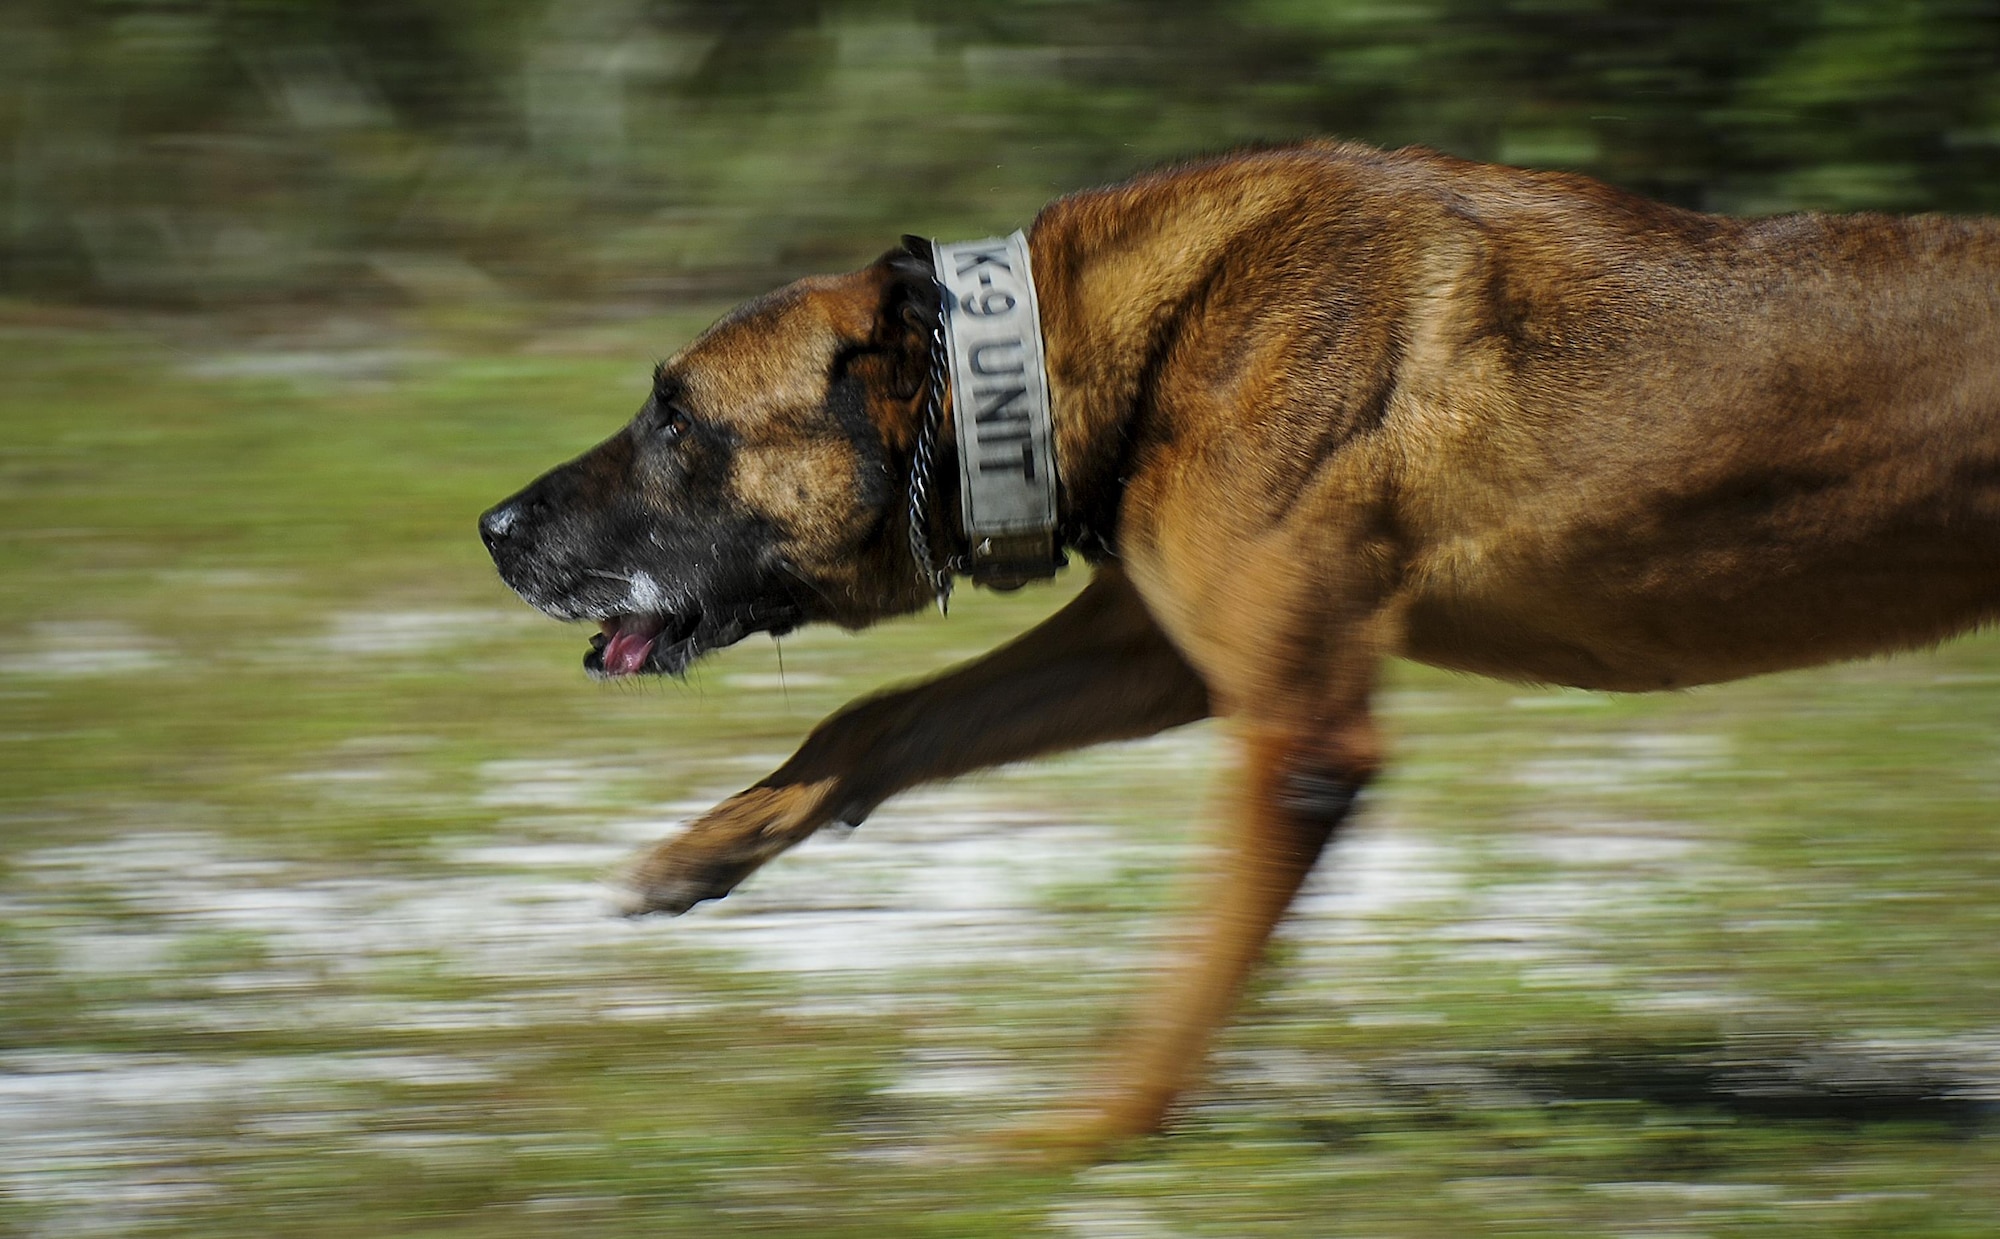 Ziko, a military working dog with the 1st Special Operations Security Forces Squadron, sprints for his toy at Hurlburt Field, Fla., Aug. 23, 2016. Once a dog has performed his duties correctly during training and demonstrations, they are rewarded with a toy for complying with their handler. (U.S. Air Force photo by Airman 1st Class Joseph Pick)